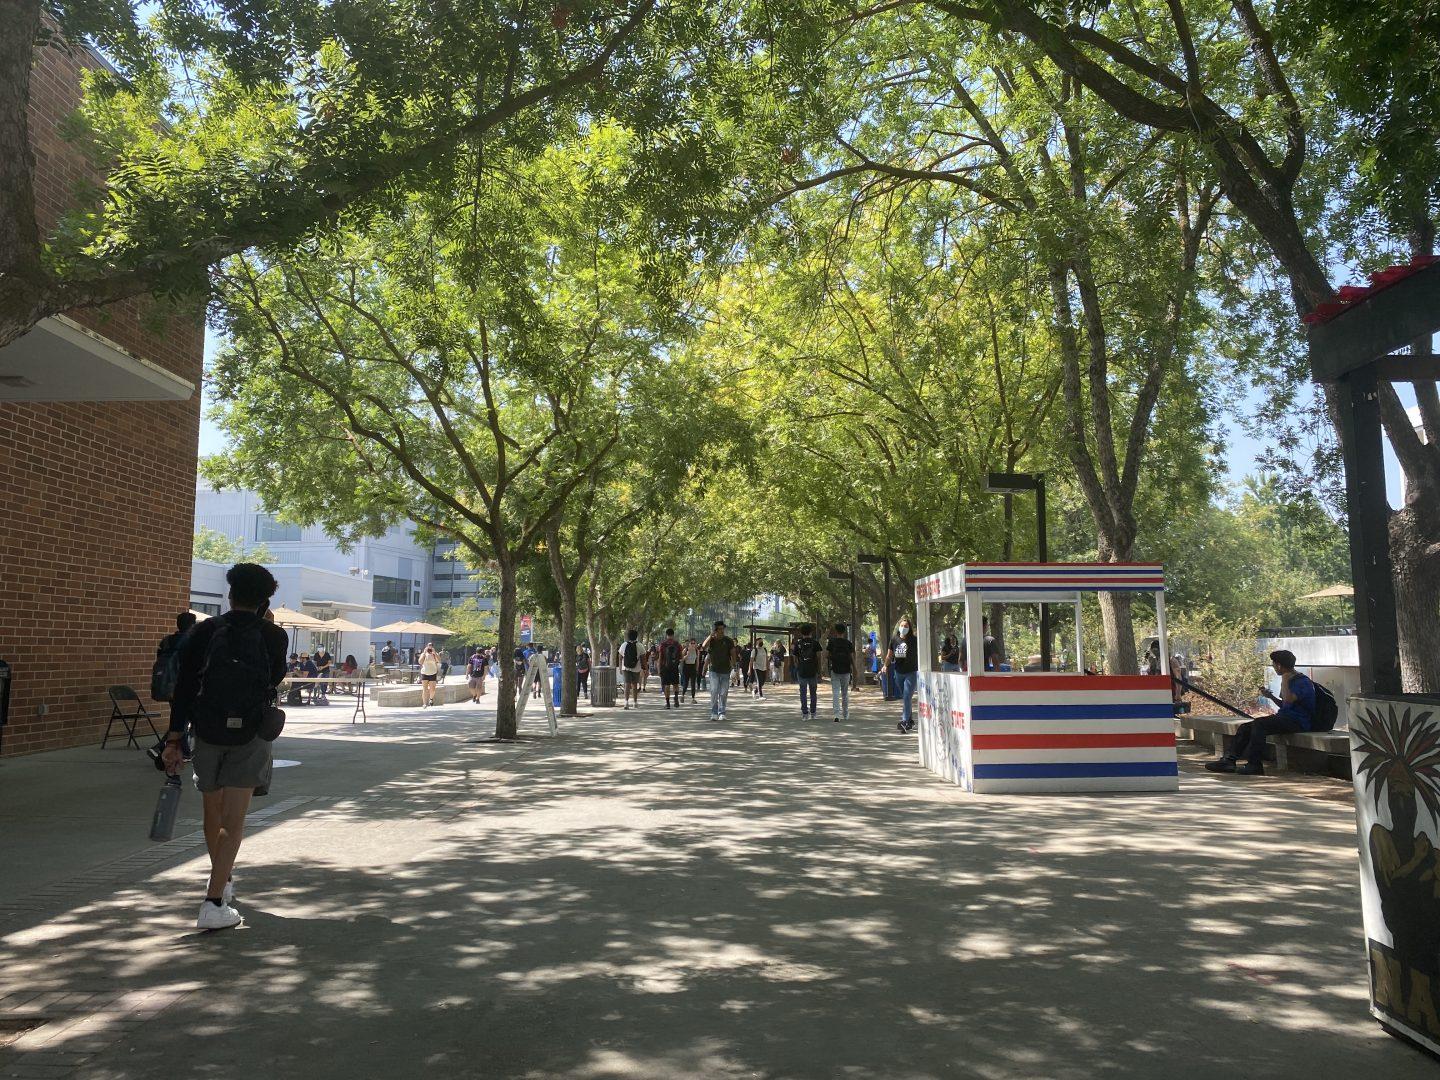 The club pathway across the University Student Union came back to life after nearly 18 months of online learning. (Jannah Geraldo/The Collegian)